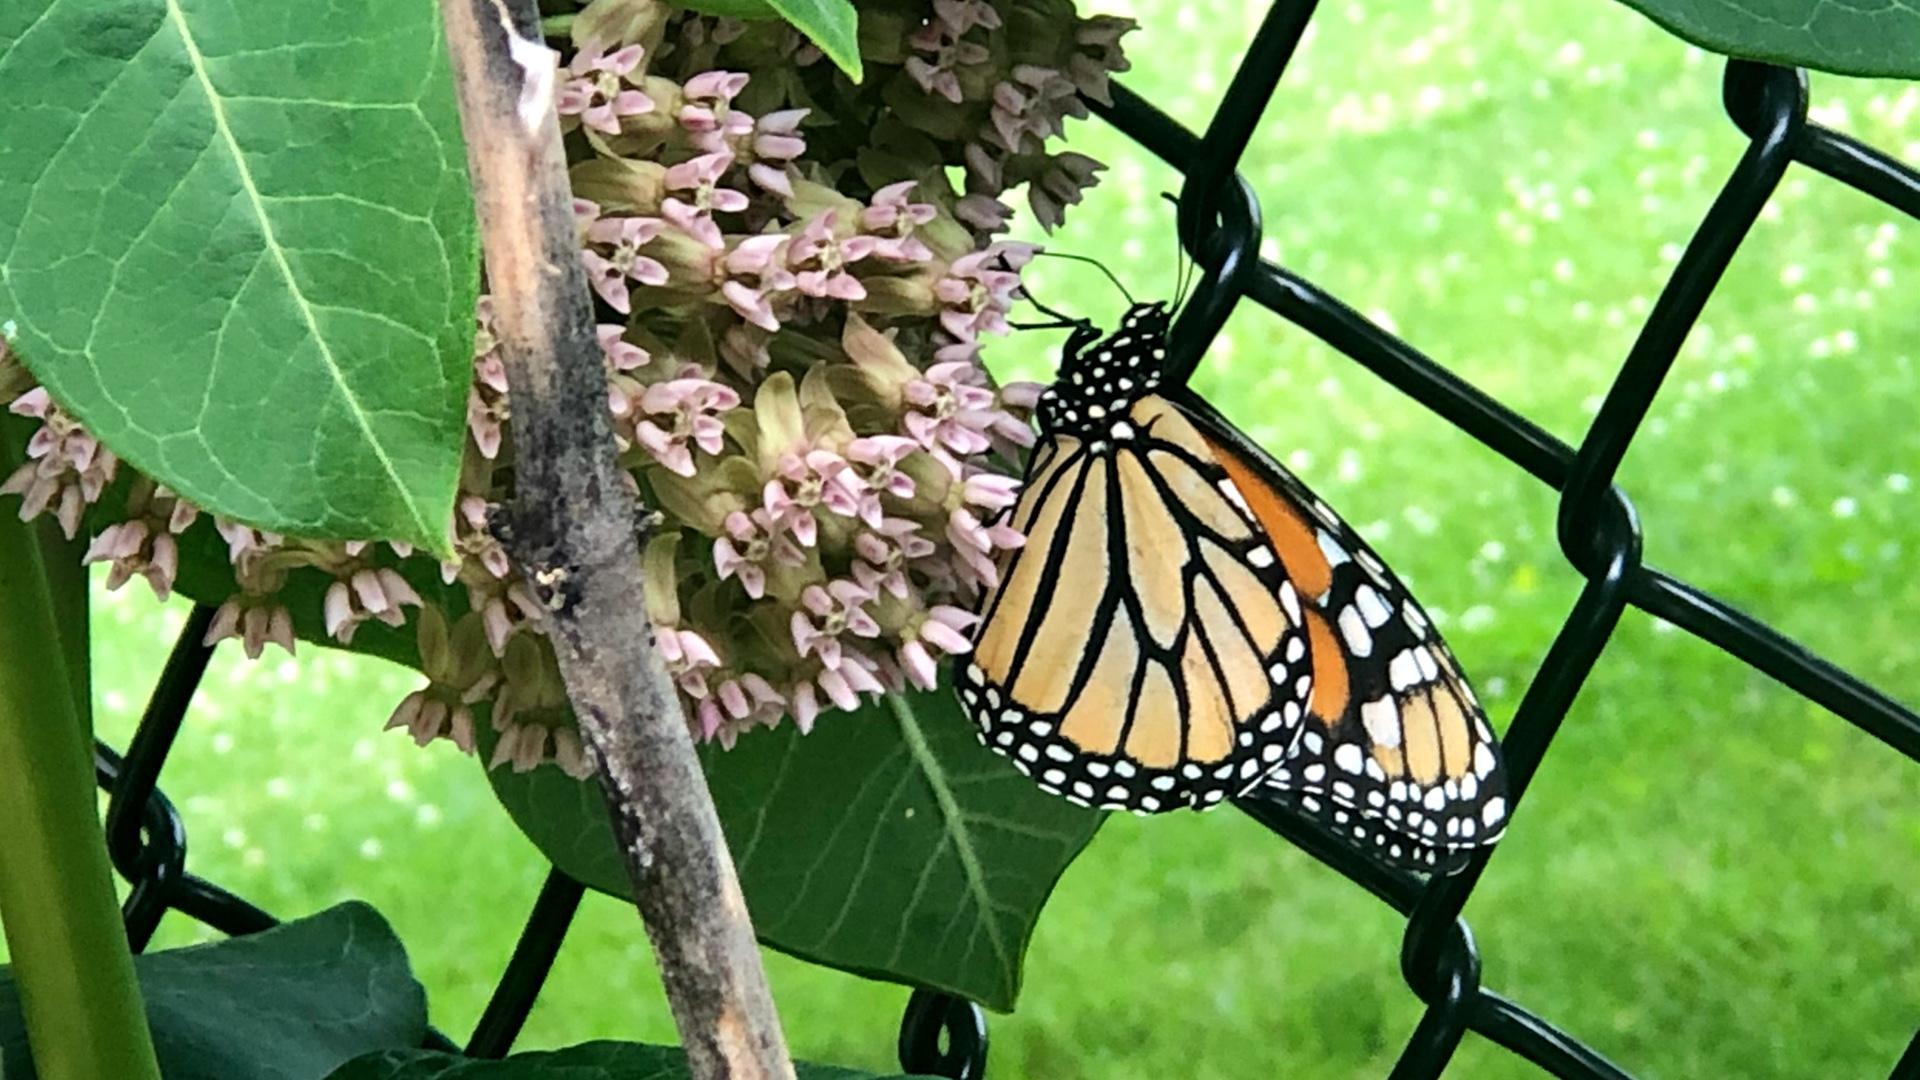 The Illinois Department of Natural Resources will use proceeds from the monarch butterfly sticker to plant more milkweed stems and create more habitat for the endangered insect. (Patty Wetli / WTTW News)